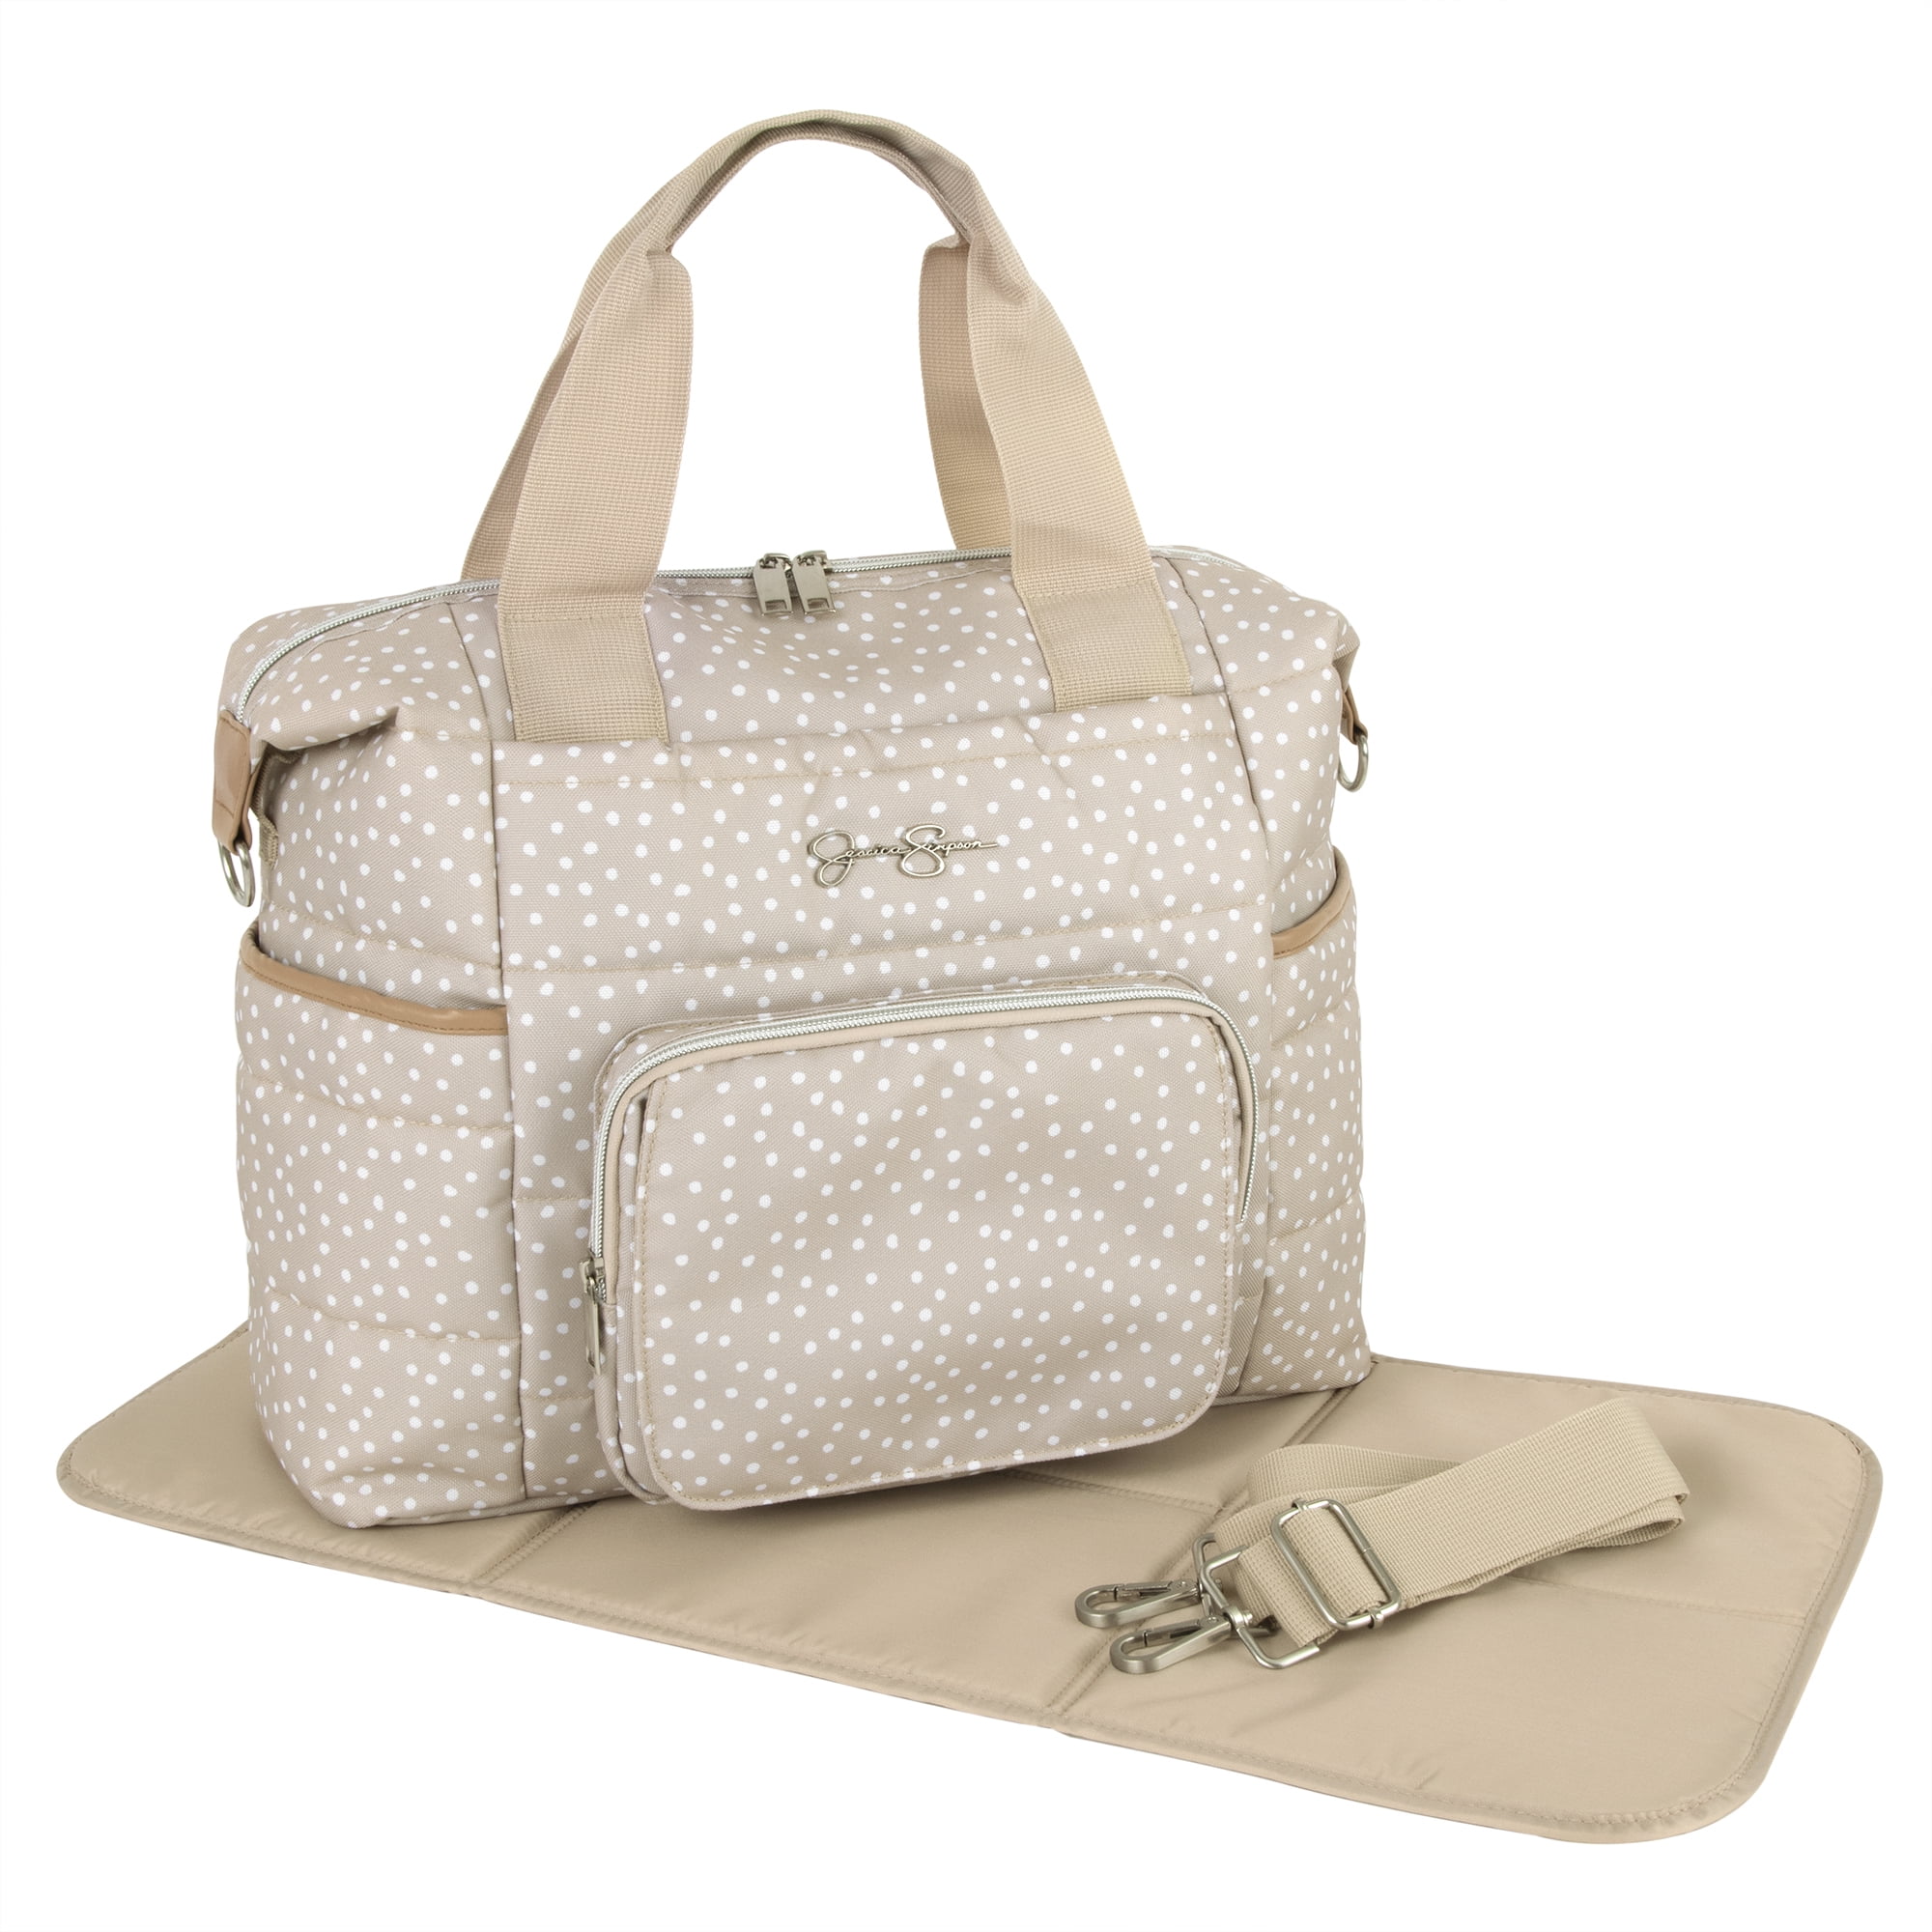 Jessica Simpson Quilted Tote - Taupe : Target